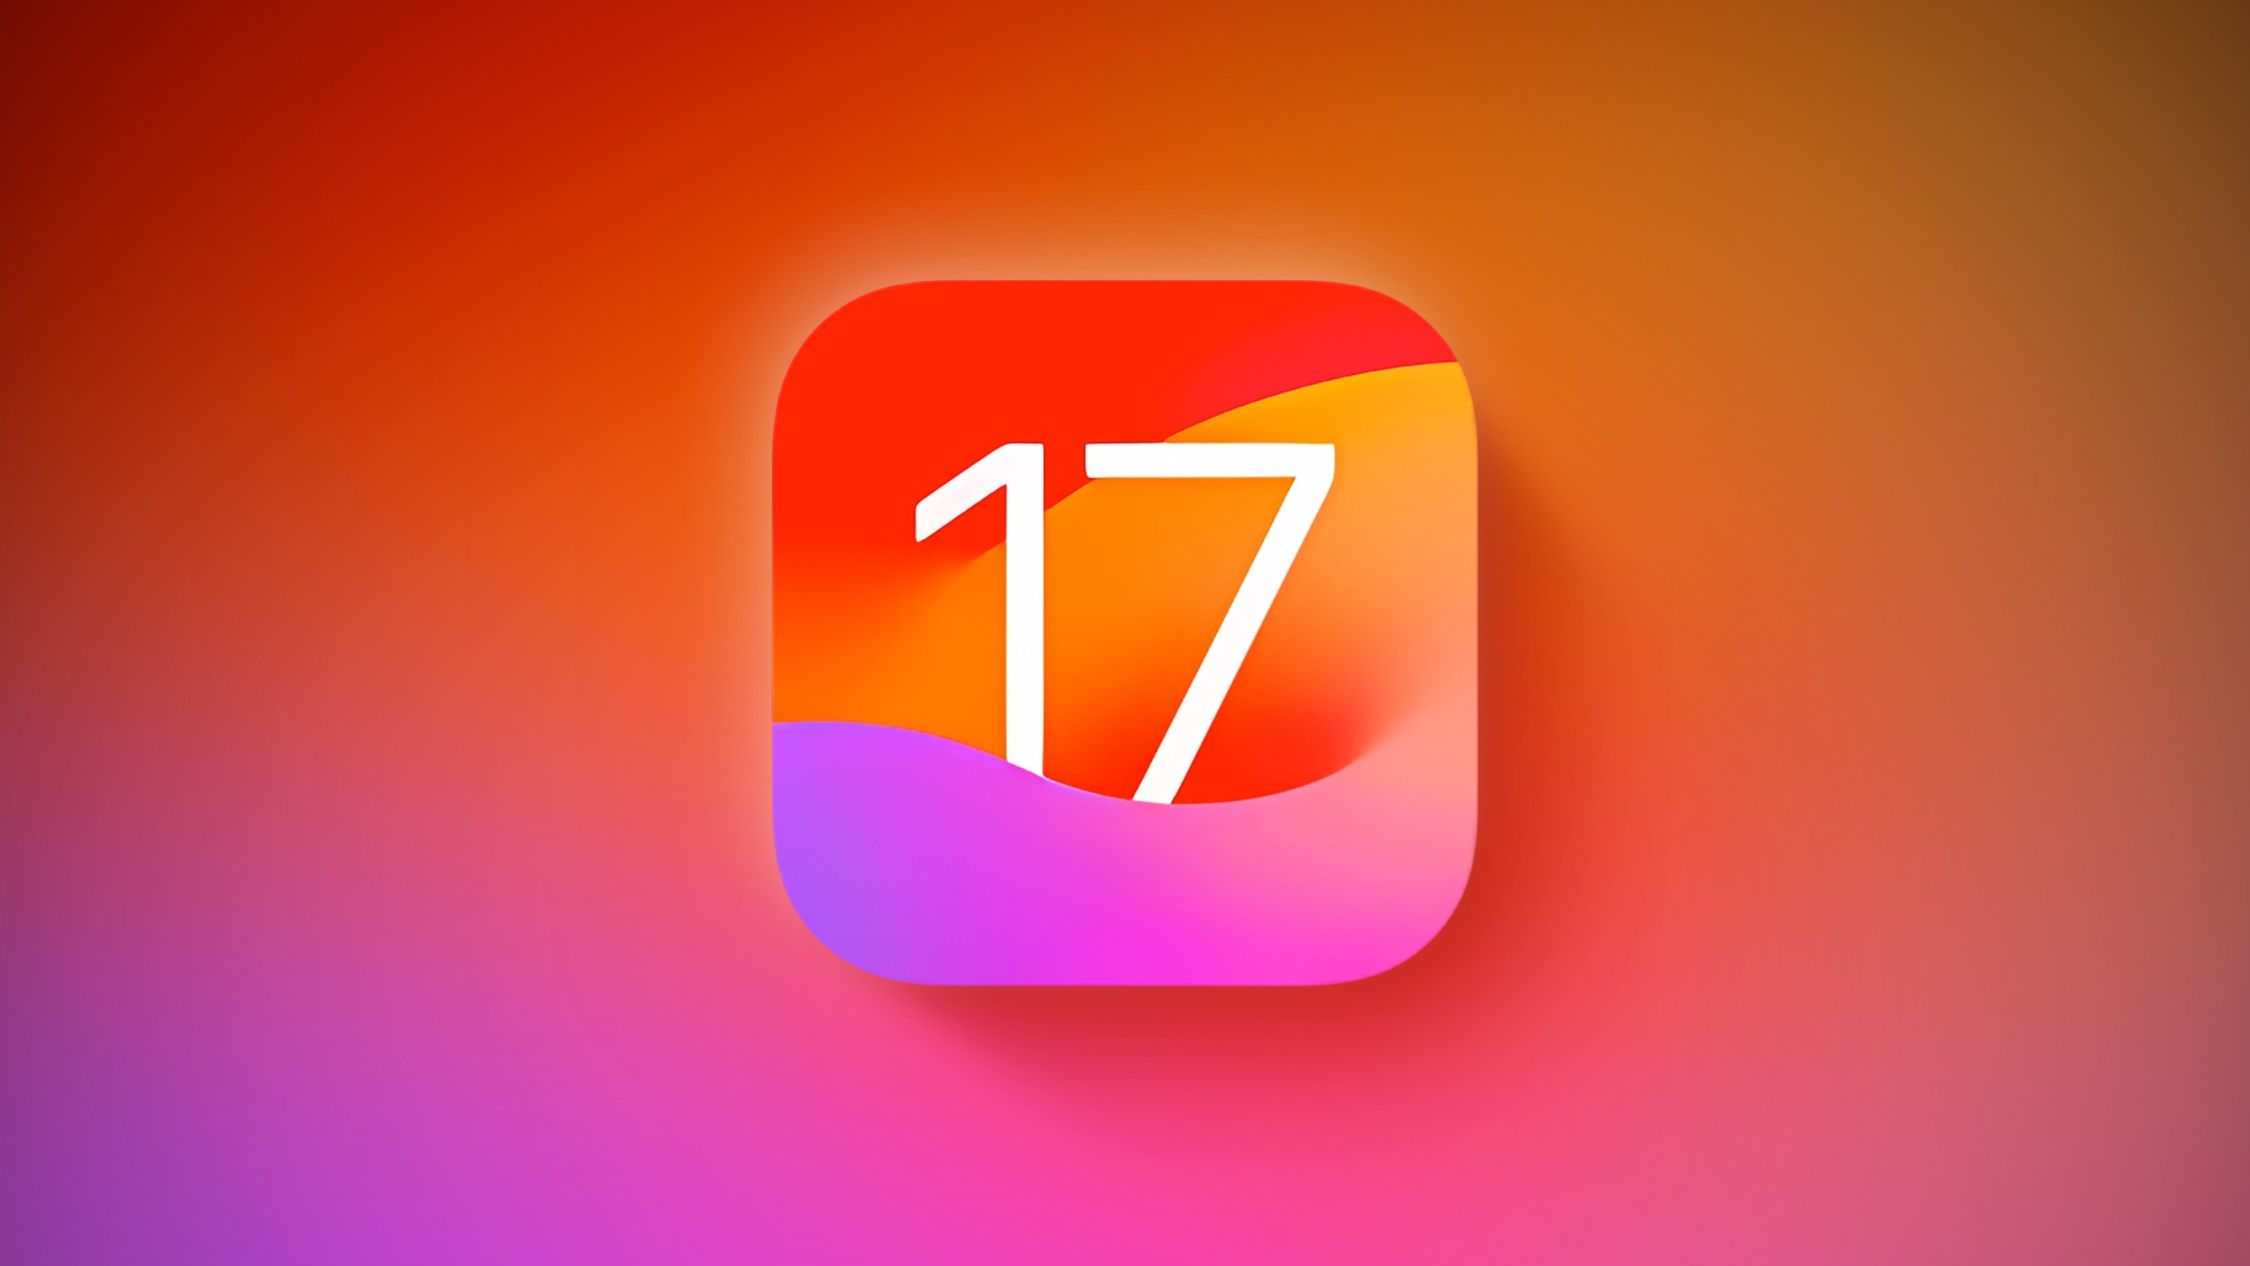 Exploring iOS 17: Common Issues and How to Fix Them